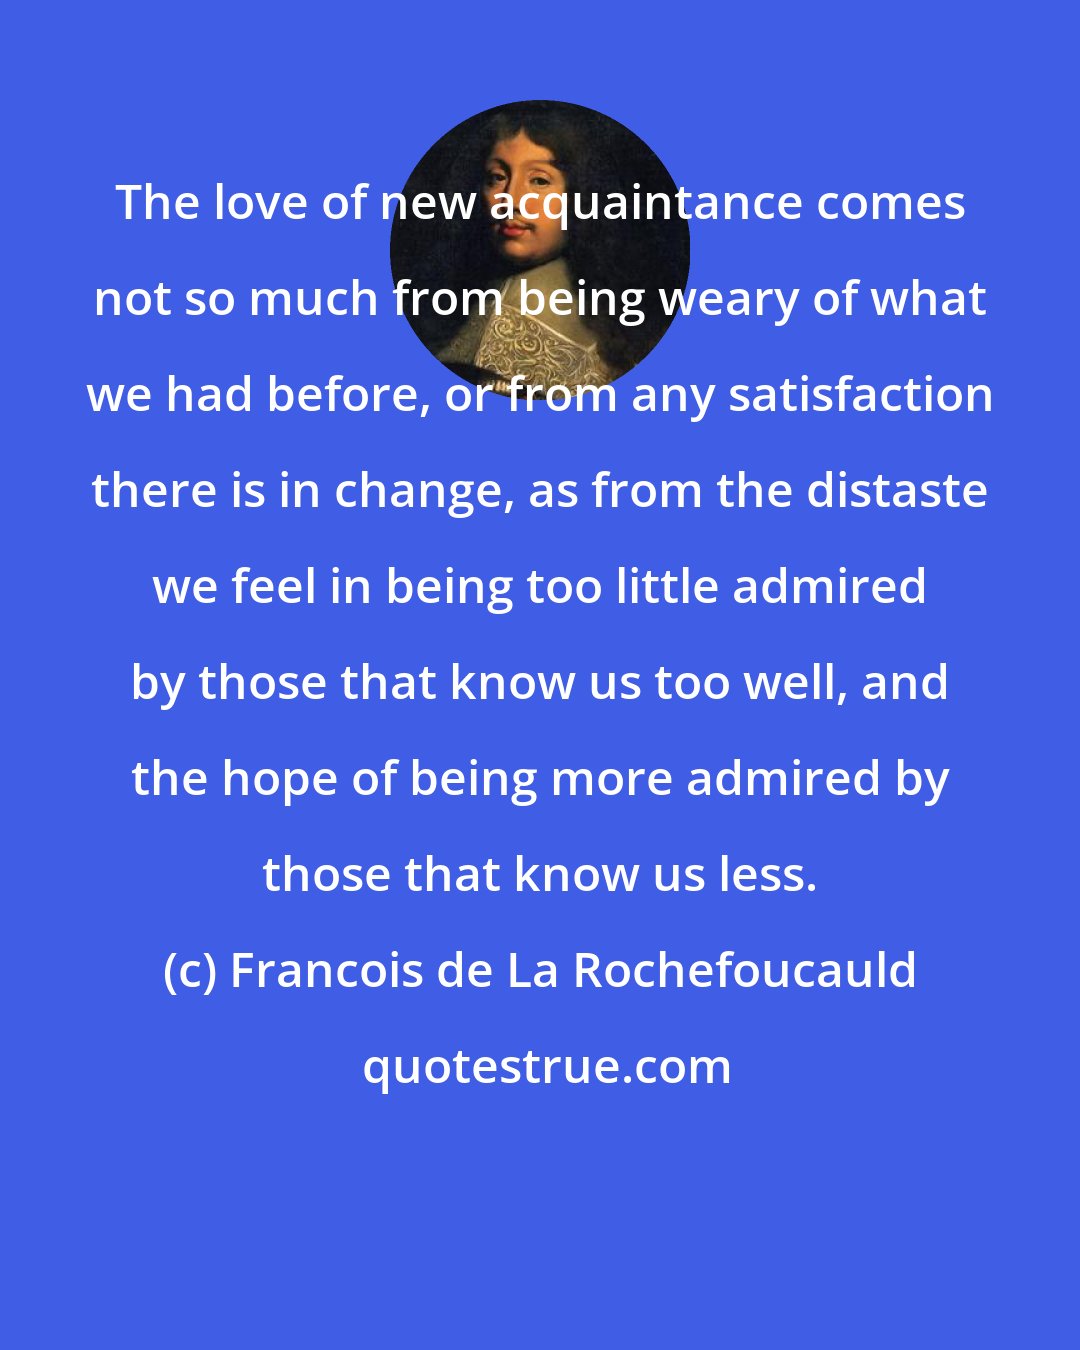 Francois de La Rochefoucauld: The love of new acquaintance comes not so much from being weary of what we had before, or from any satisfaction there is in change, as from the distaste we feel in being too little admired by those that know us too well, and the hope of being more admired by those that know us less.